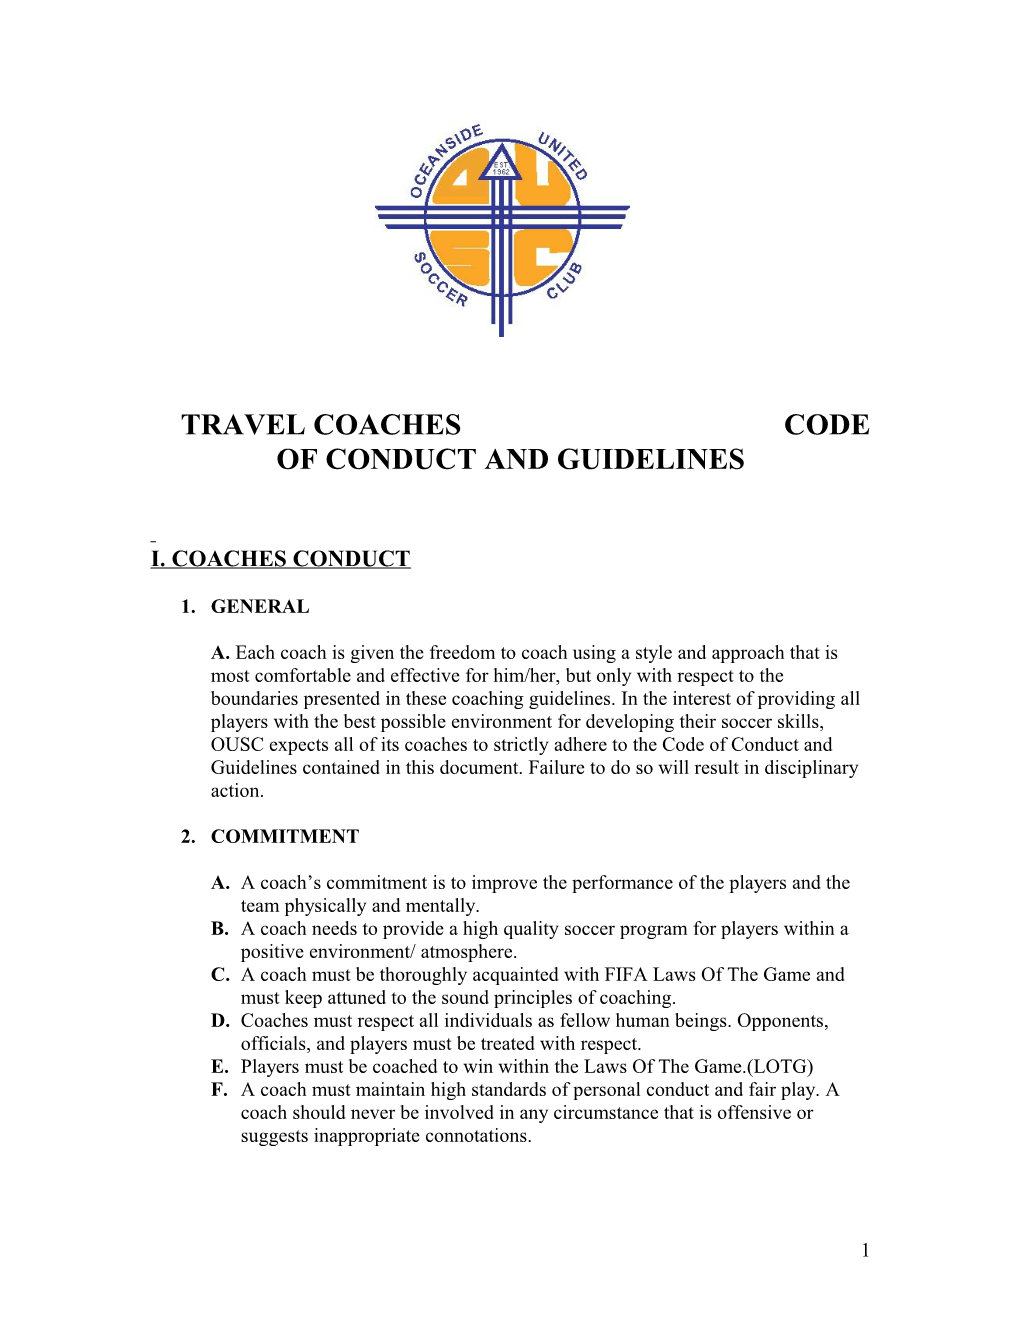 Code of Conduct and Guildlines